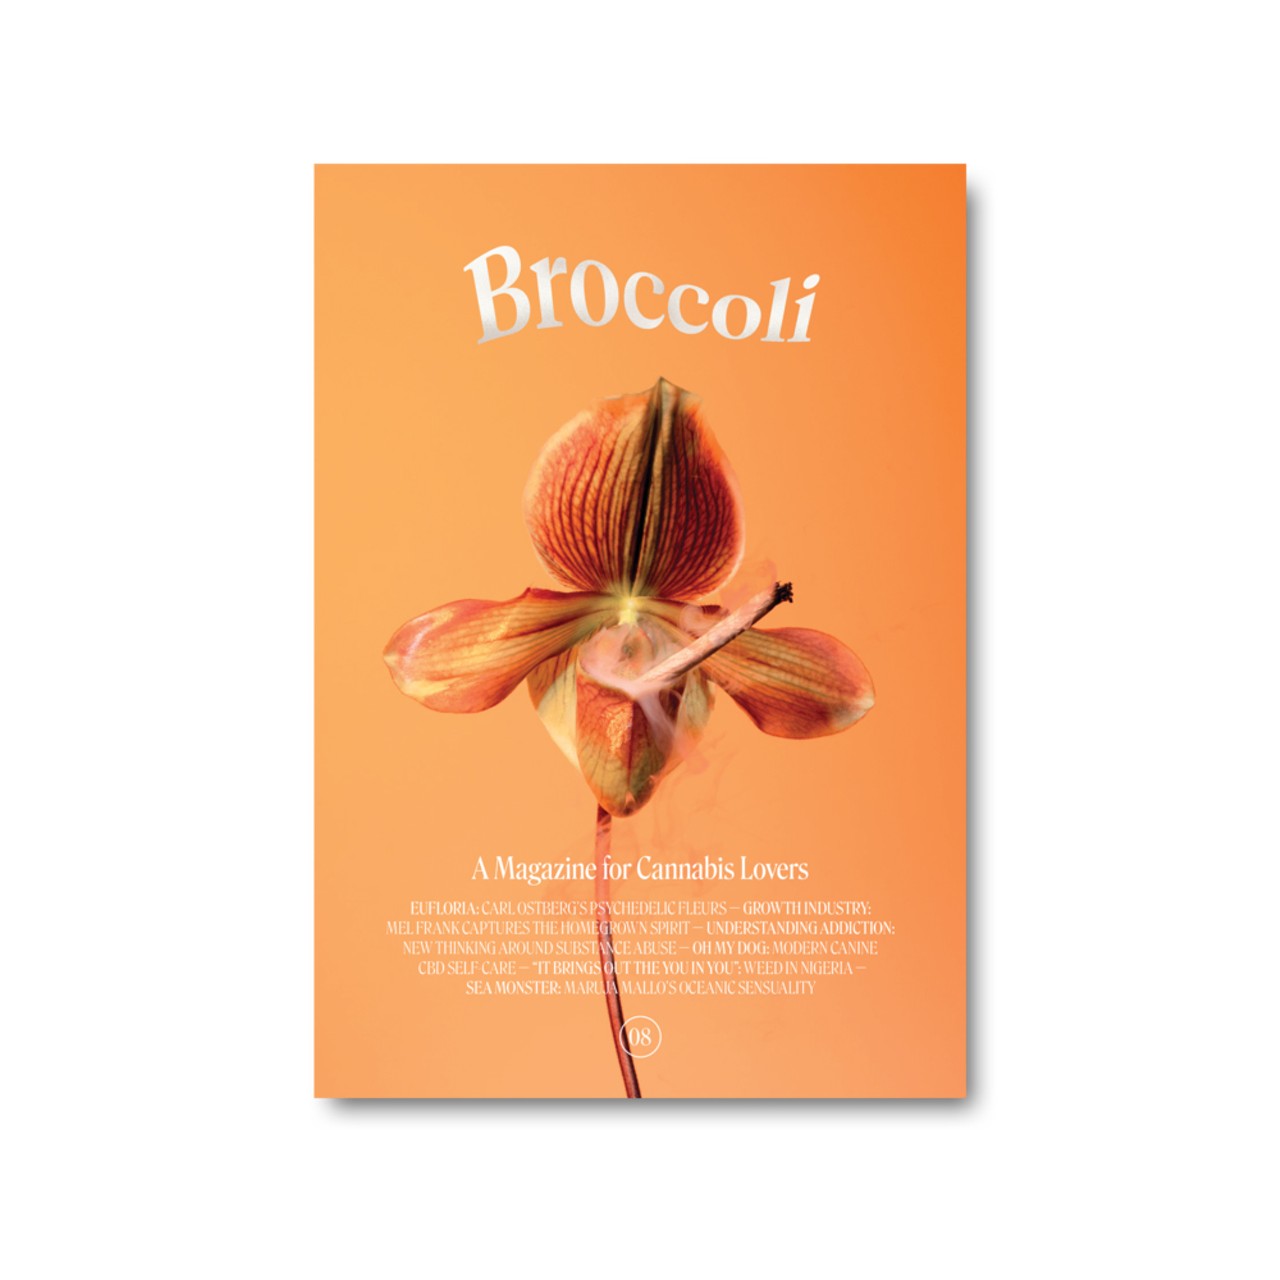 For those who want to support women-owned publications
Broccoli magazine, $8.99
New Standard, 24906 John R Rd., Hazel Park; 248-873-0420; anewstandard.com
While the cannabis industry remains a male-dominated field, women have been using cannabis since, like, the dawn of time. In fact, according to ancient Egyptian medical text, cannabis is described as medicine for active labor as far back as 1500 BCE. Hell, reports suggest Roman women from 600 BCE-500 BCE also used cannabis for labor pains. But cannabis, regardless of the industry, is the people&#146;s plant, which is what Broccoli magazine is all about. Throughout its tri-annual publication, which has been created by an all-women team with an international network of contributors, Broccoli examines art, culture, fashion, and news relating to cannabis across the globe and encourages a personal journey of self-discovery through cannabis. Oh, and they&#146;re really beautifully made and are a great addition to that stack of High Times on your coffee table.